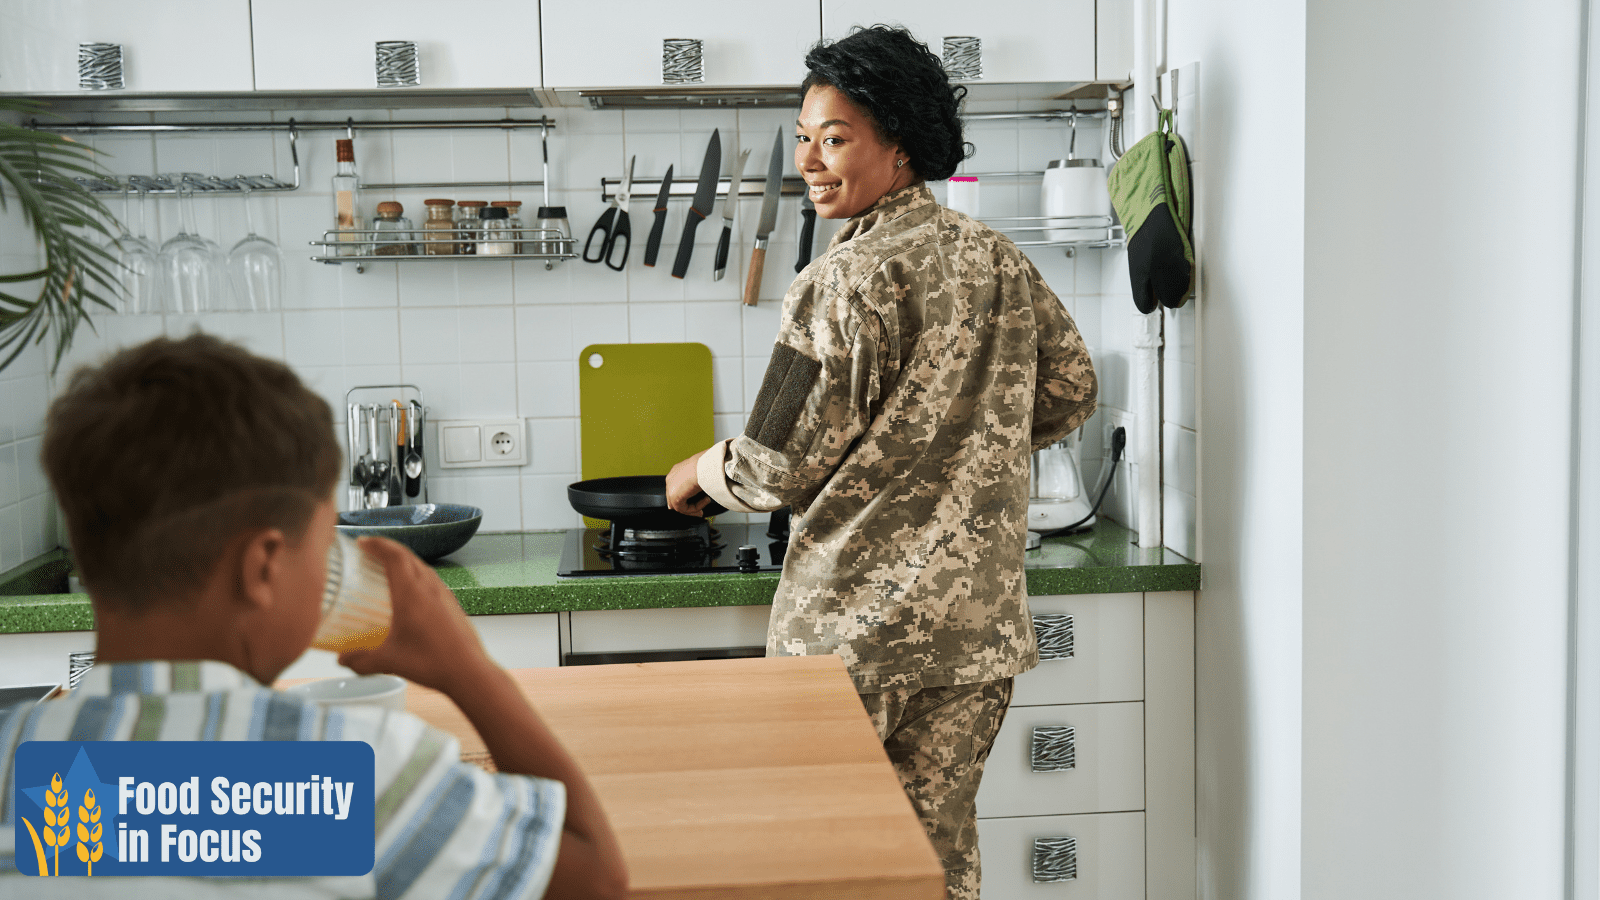 A woman in her uniform cooks breakfast for a young child in a kitchen, food security in focus logo